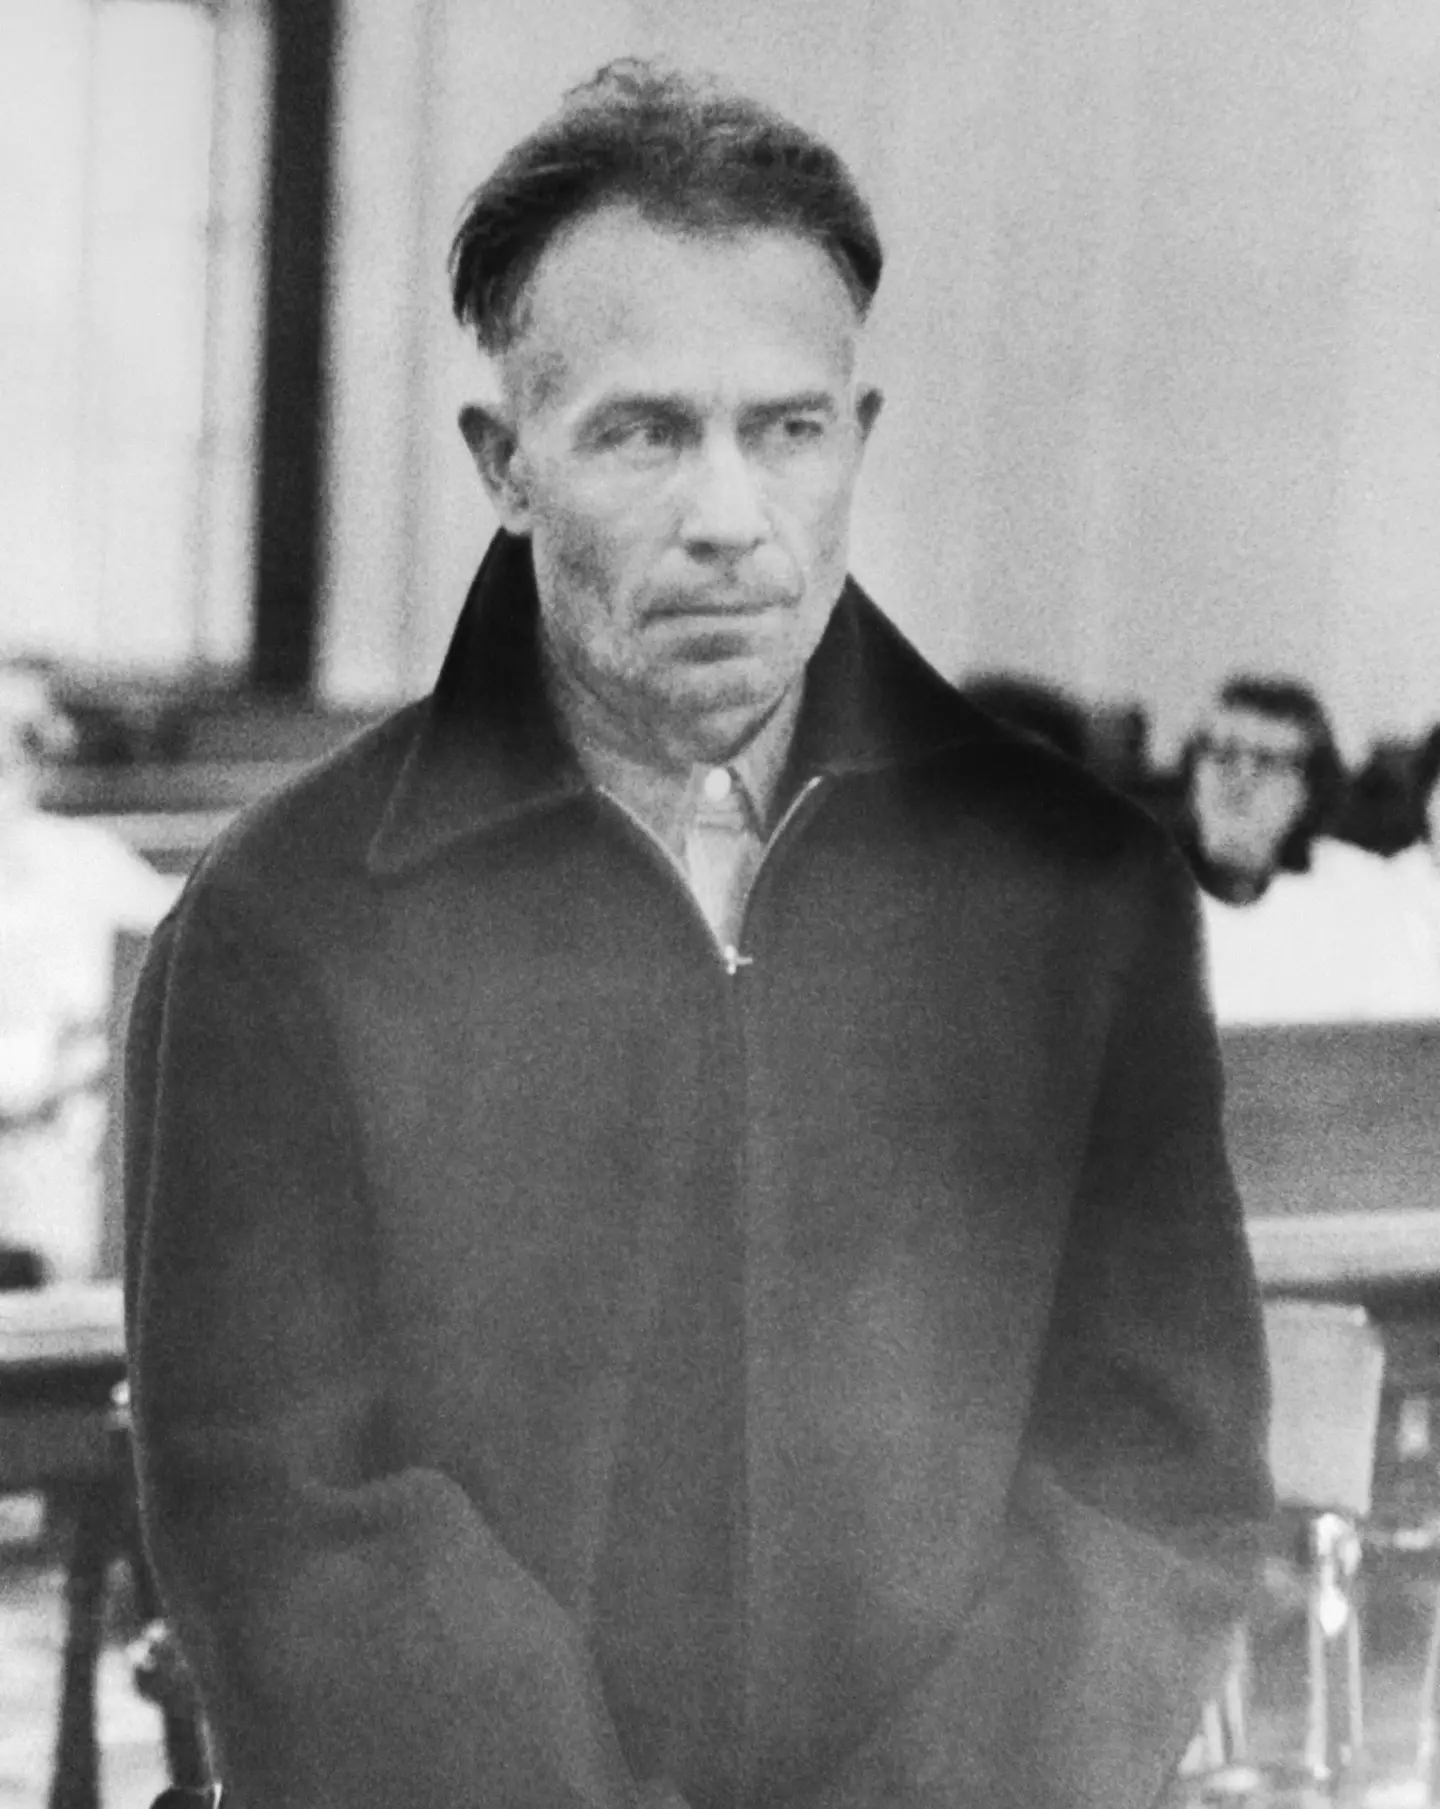 Ed Gein shown in Wautoma court in 1957.